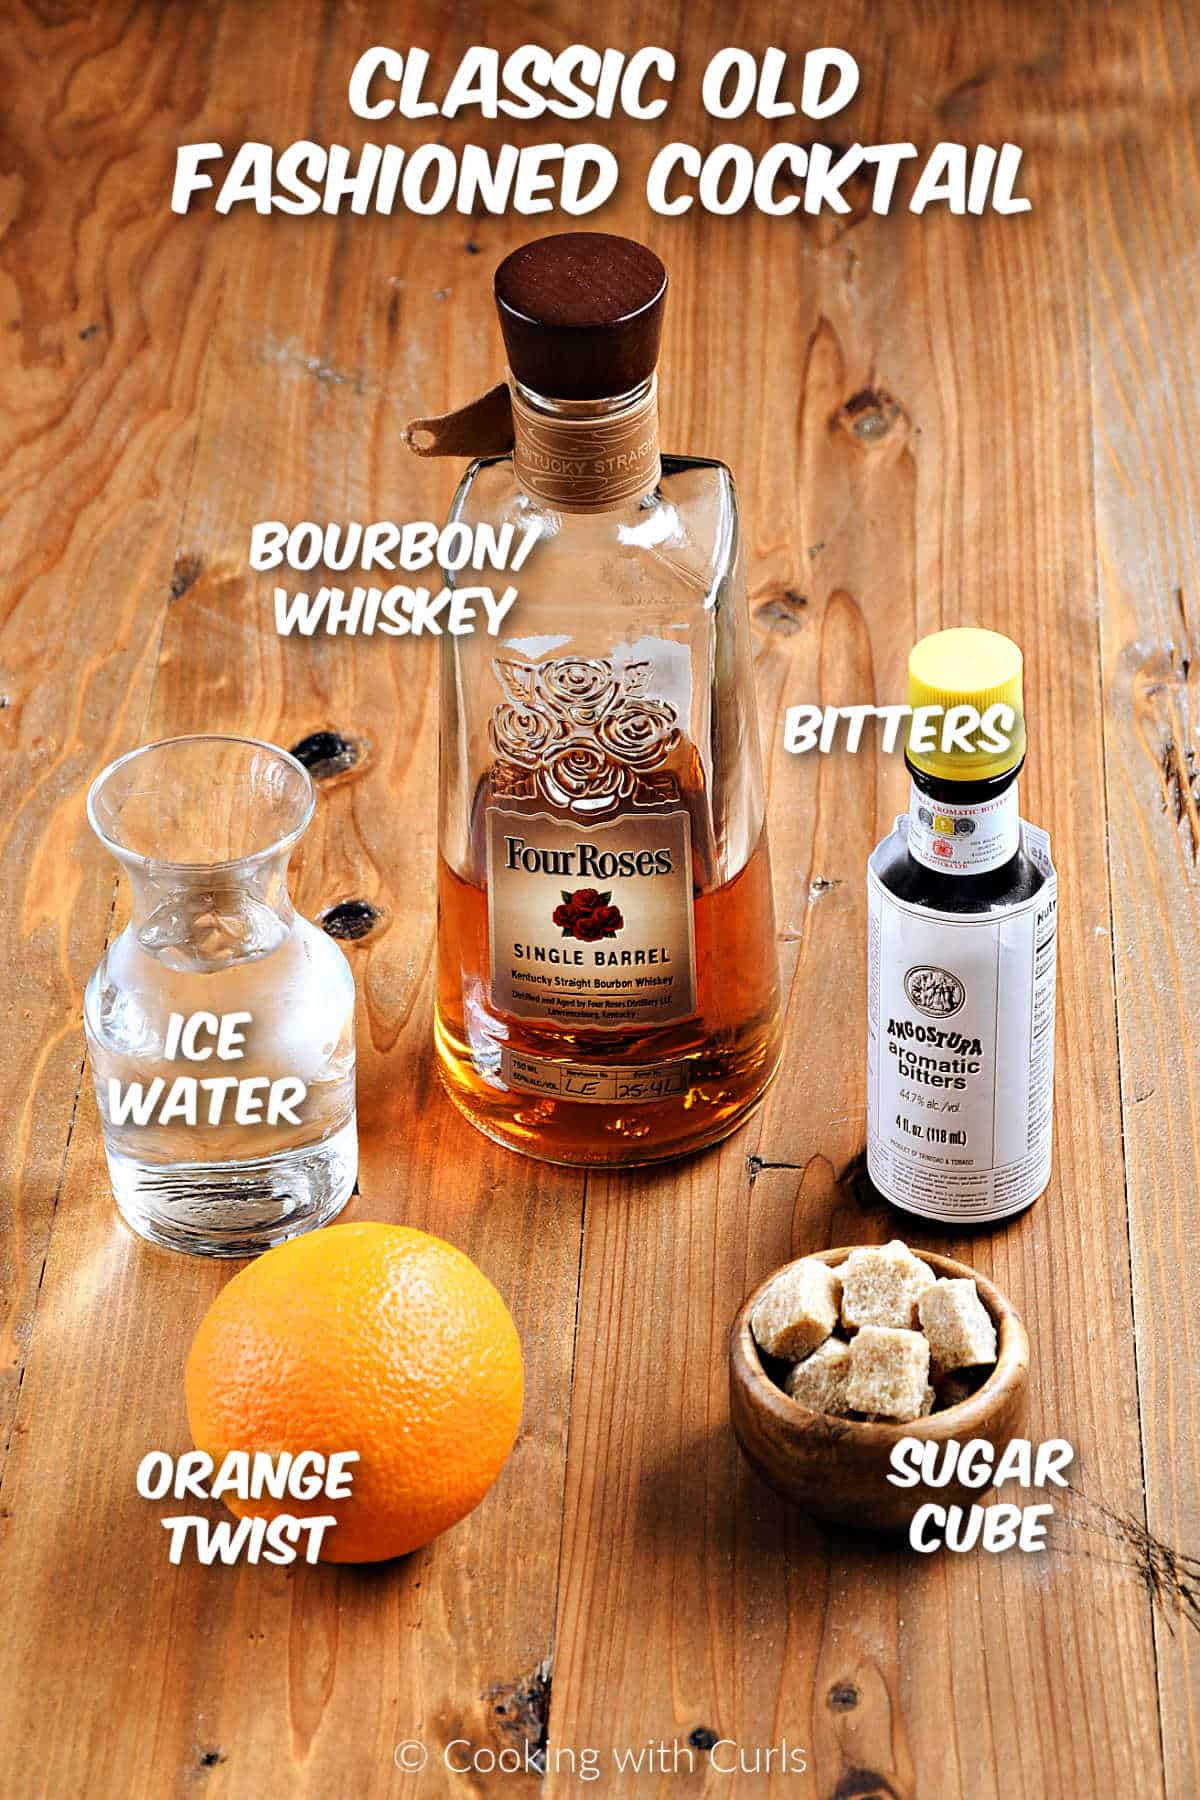 Ingredients to make a classic old fashioned cocktail.